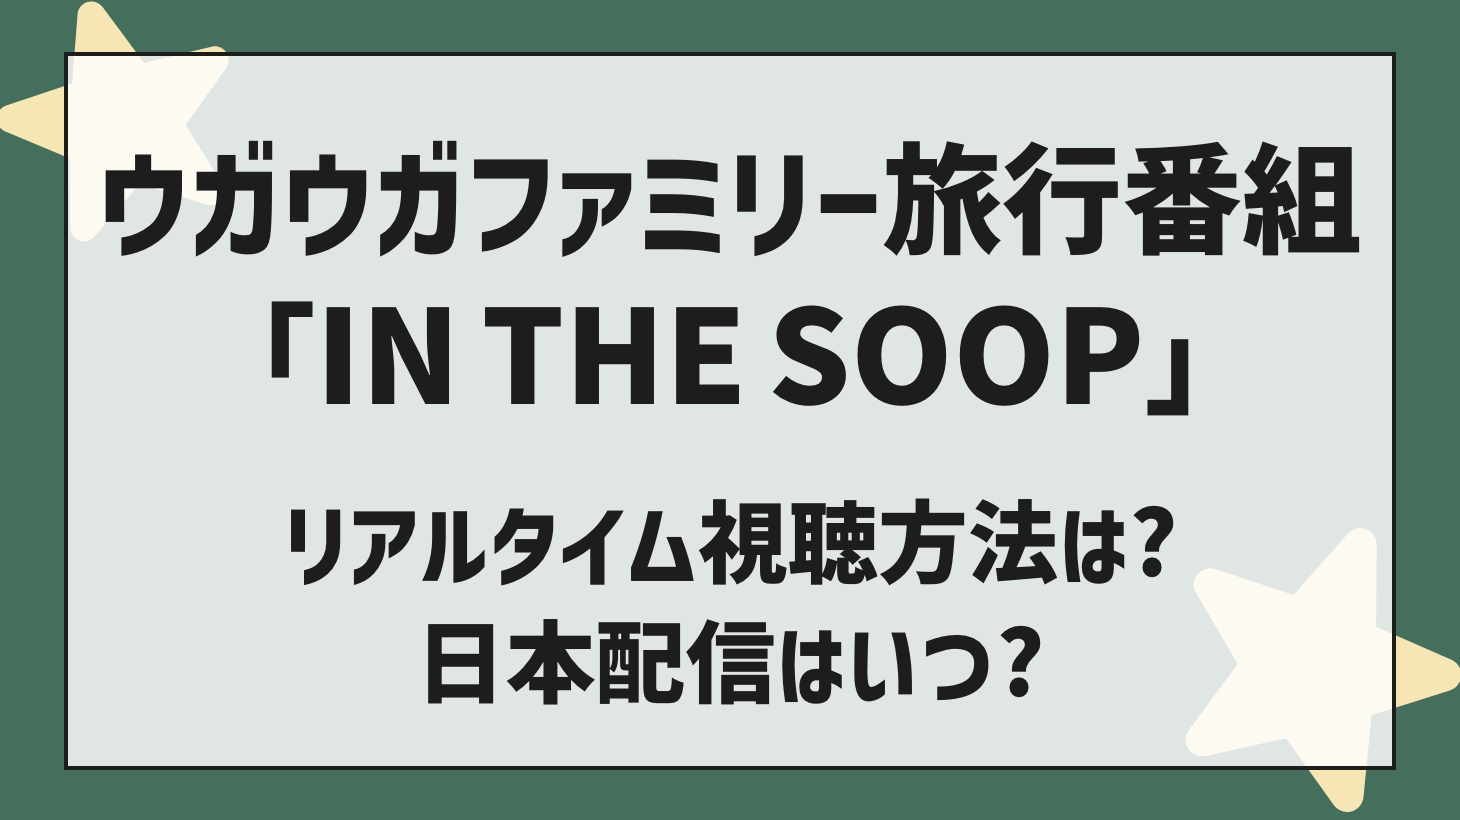 How to watch the Ugauga family travel program "IN THE SOOP"? When will it be delivered?